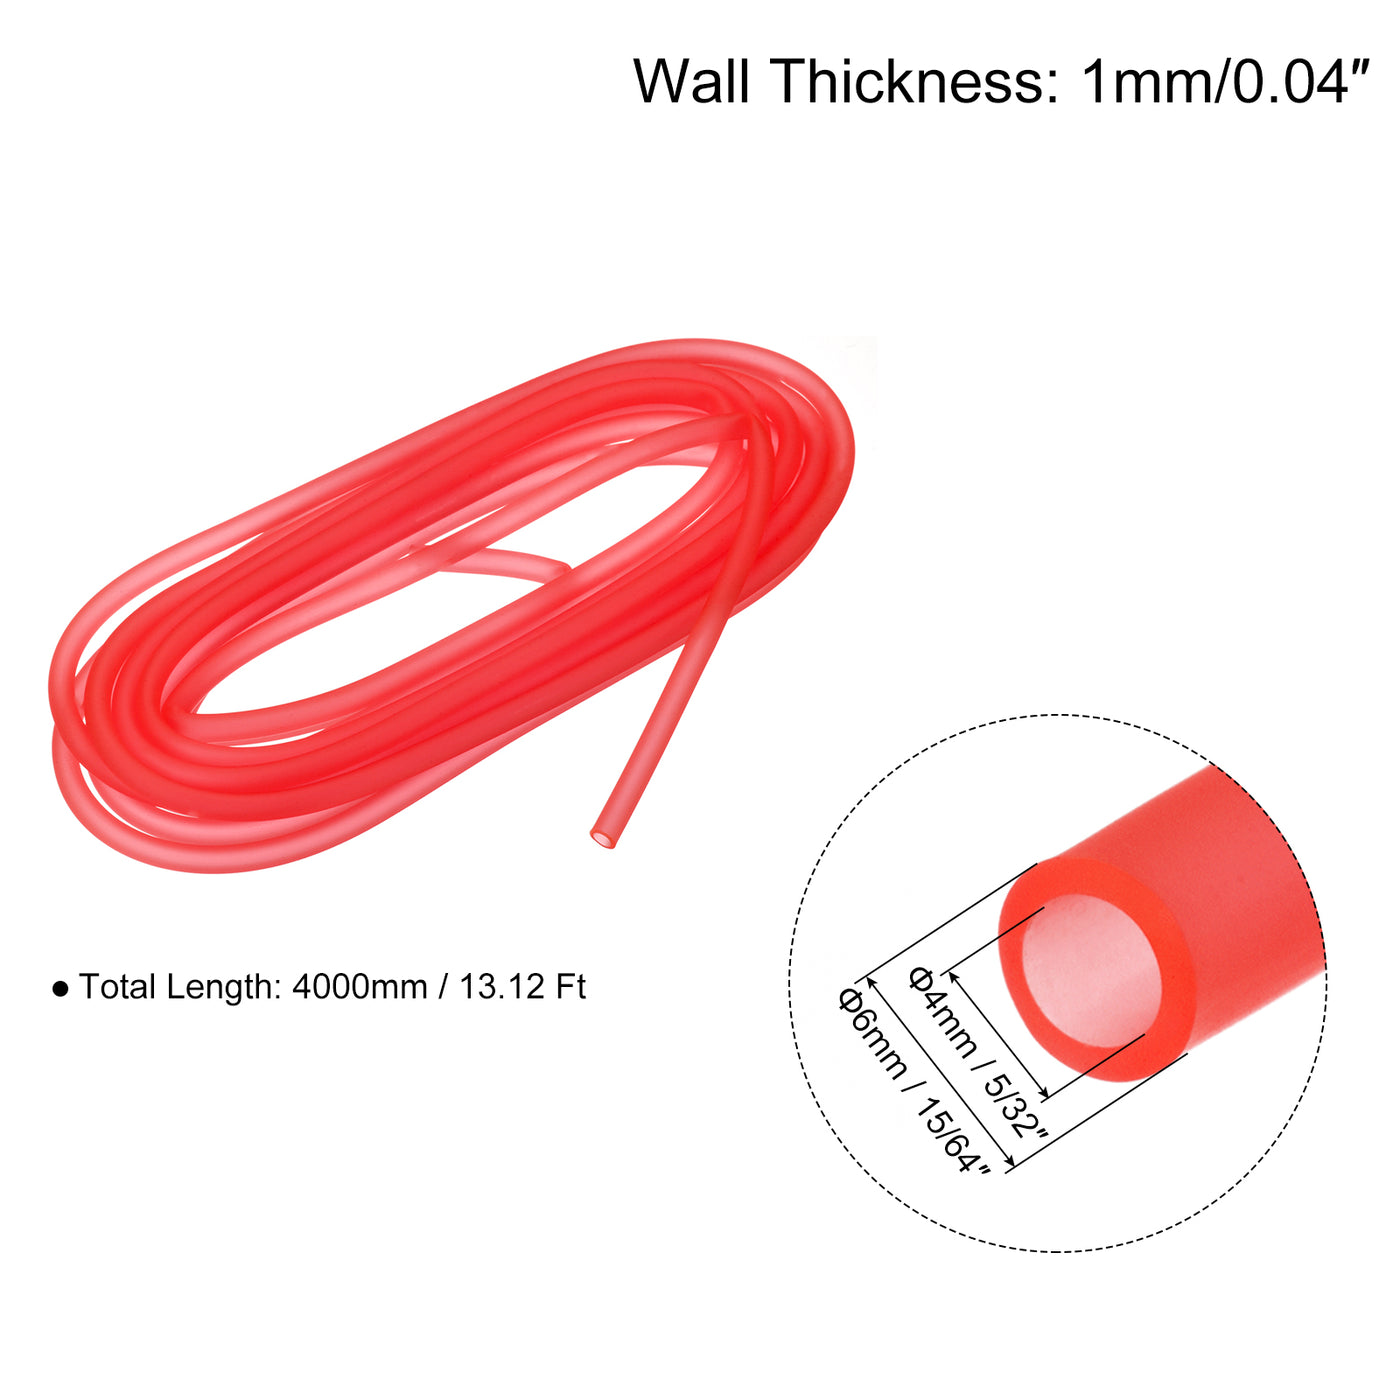 uxcell Uxcell Silicone Tubing 5/32" ID, 15/64" OD 1Pcs 13.12 Ft for Pump Transfer, Red